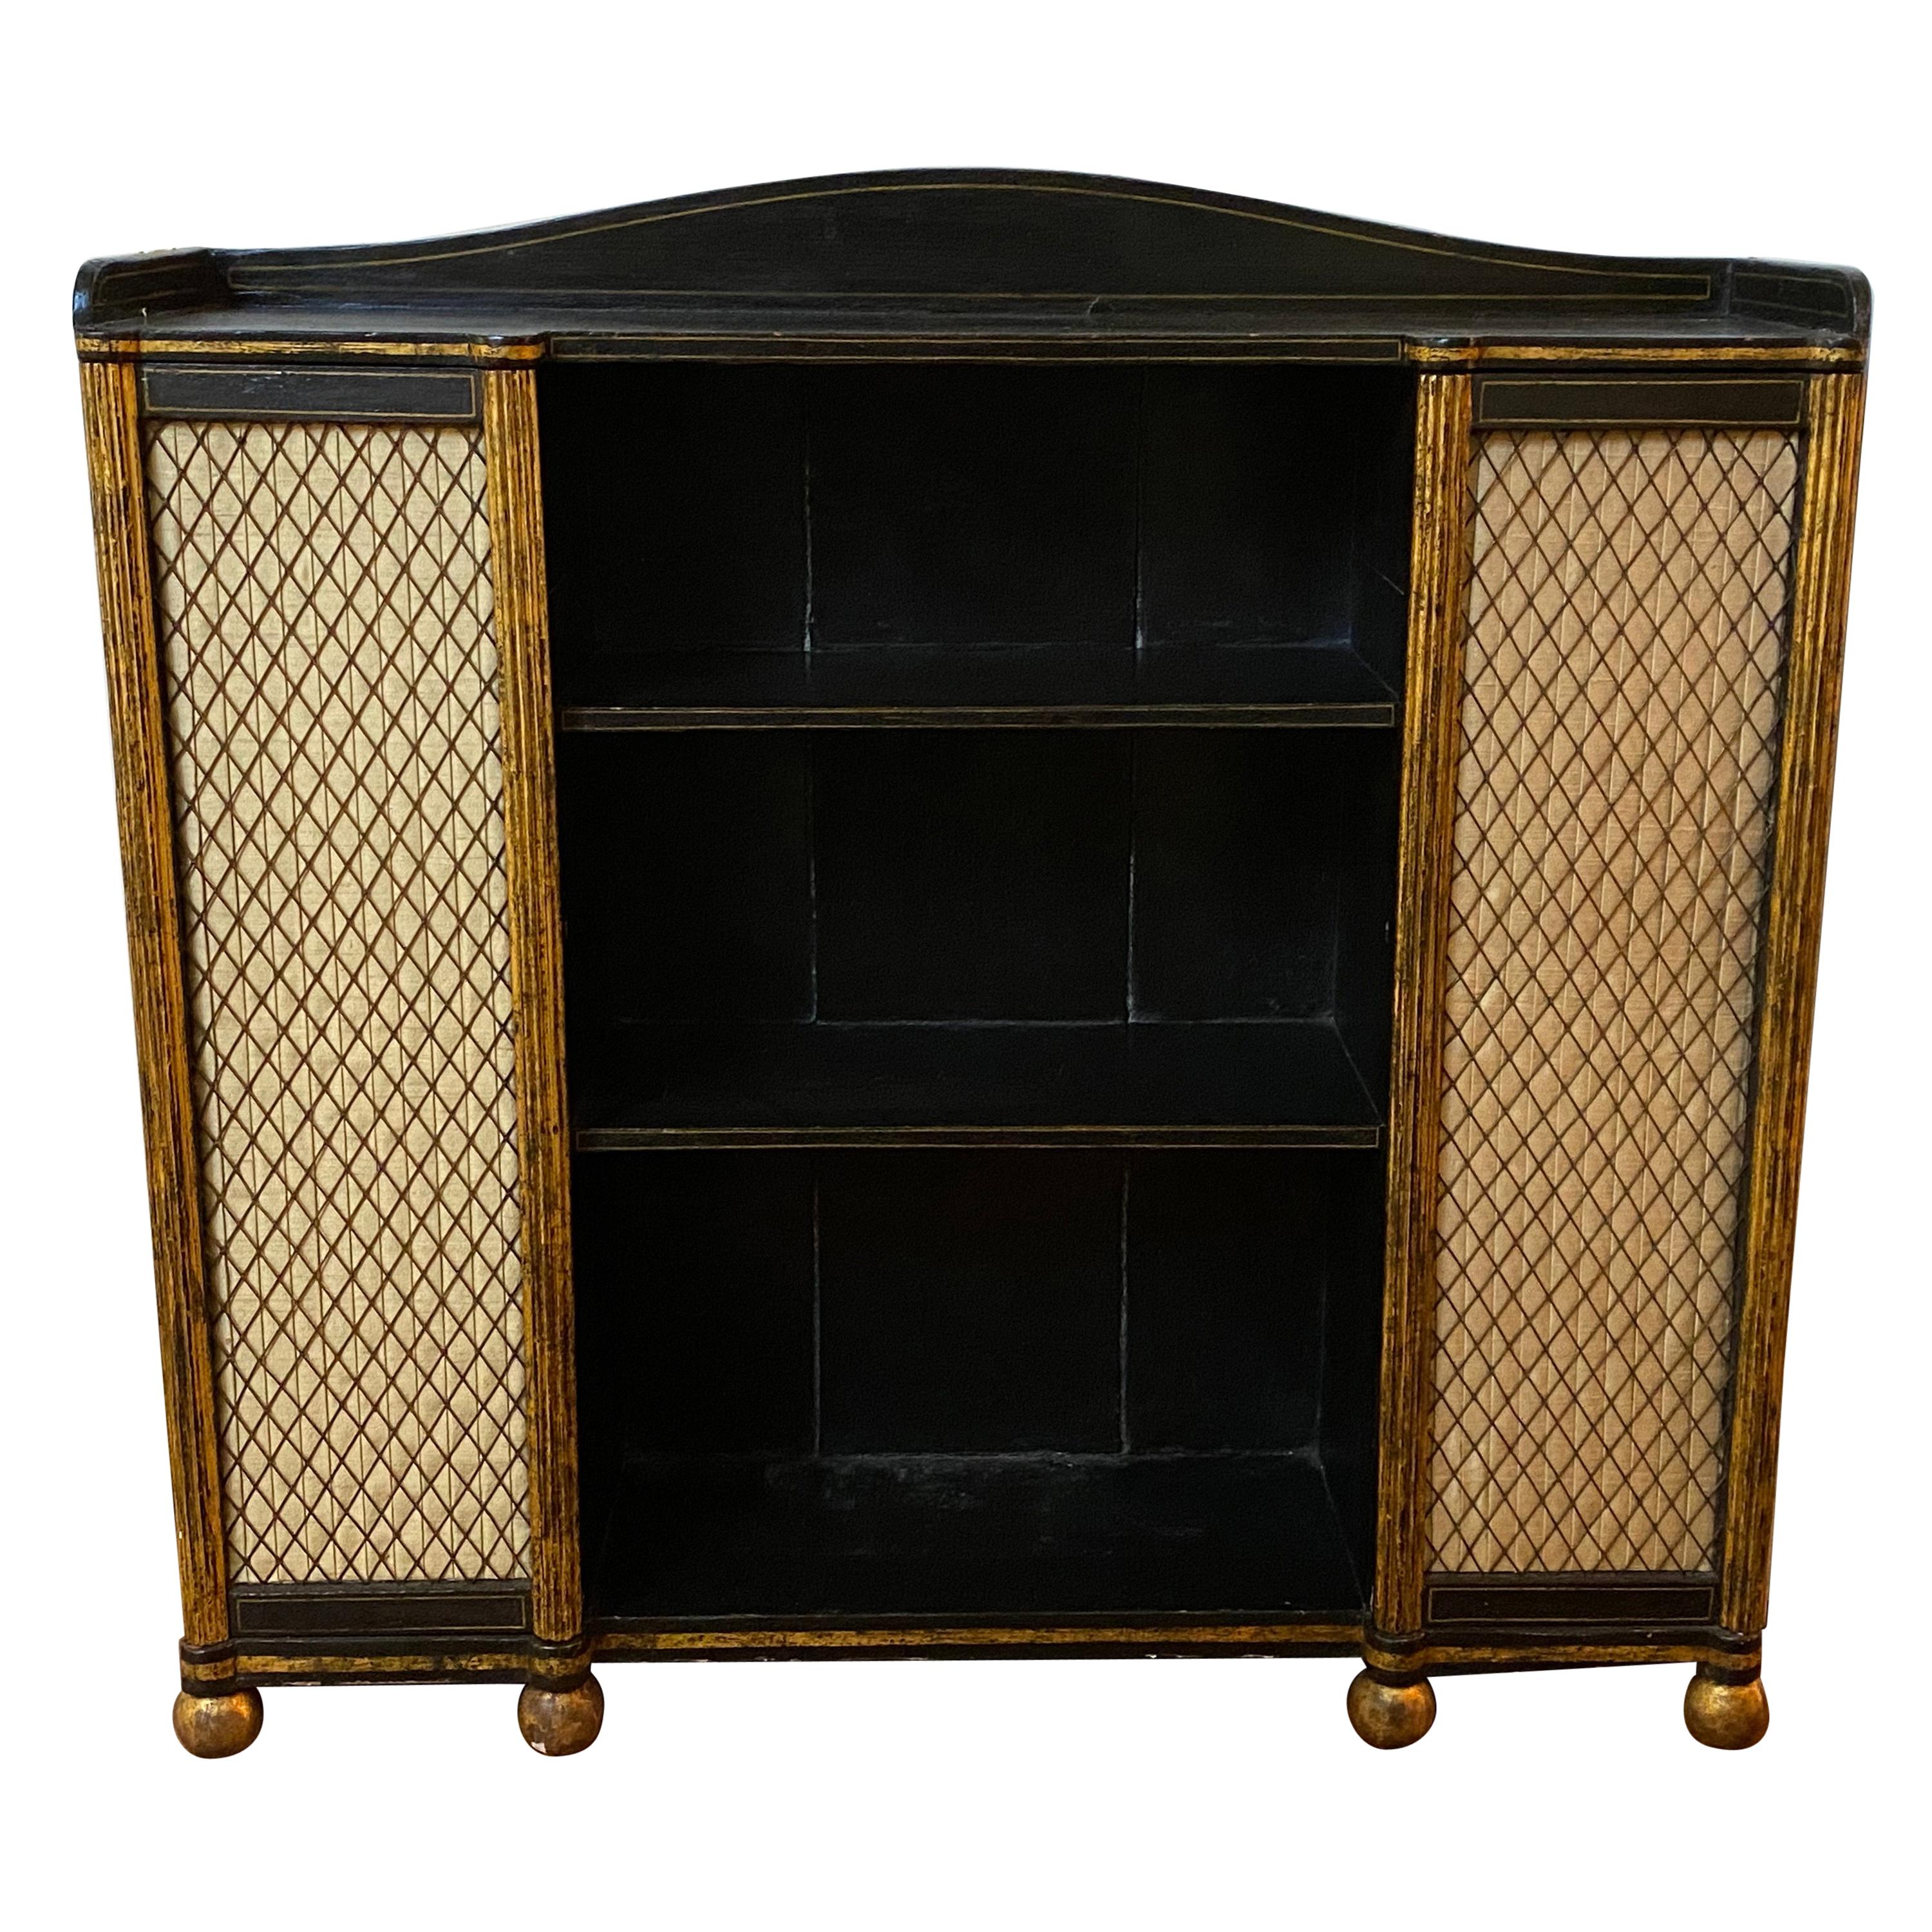 Regency Black and Gold Decorated Open Bookshelves with Silk Doors, 19th Century